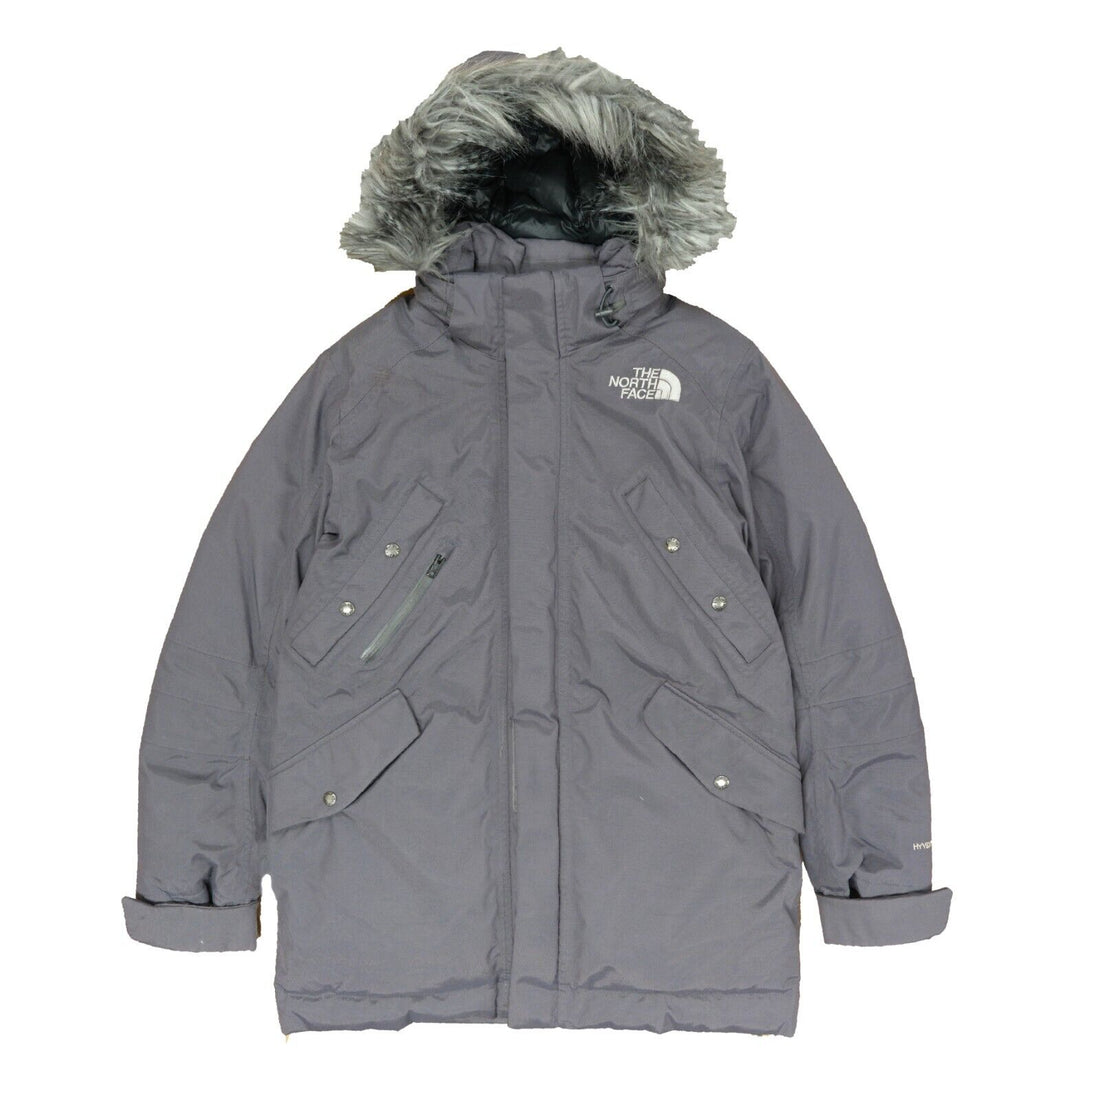 The North Face Parka Coat Jacket Size Small Gray Hyvent Down Insulated